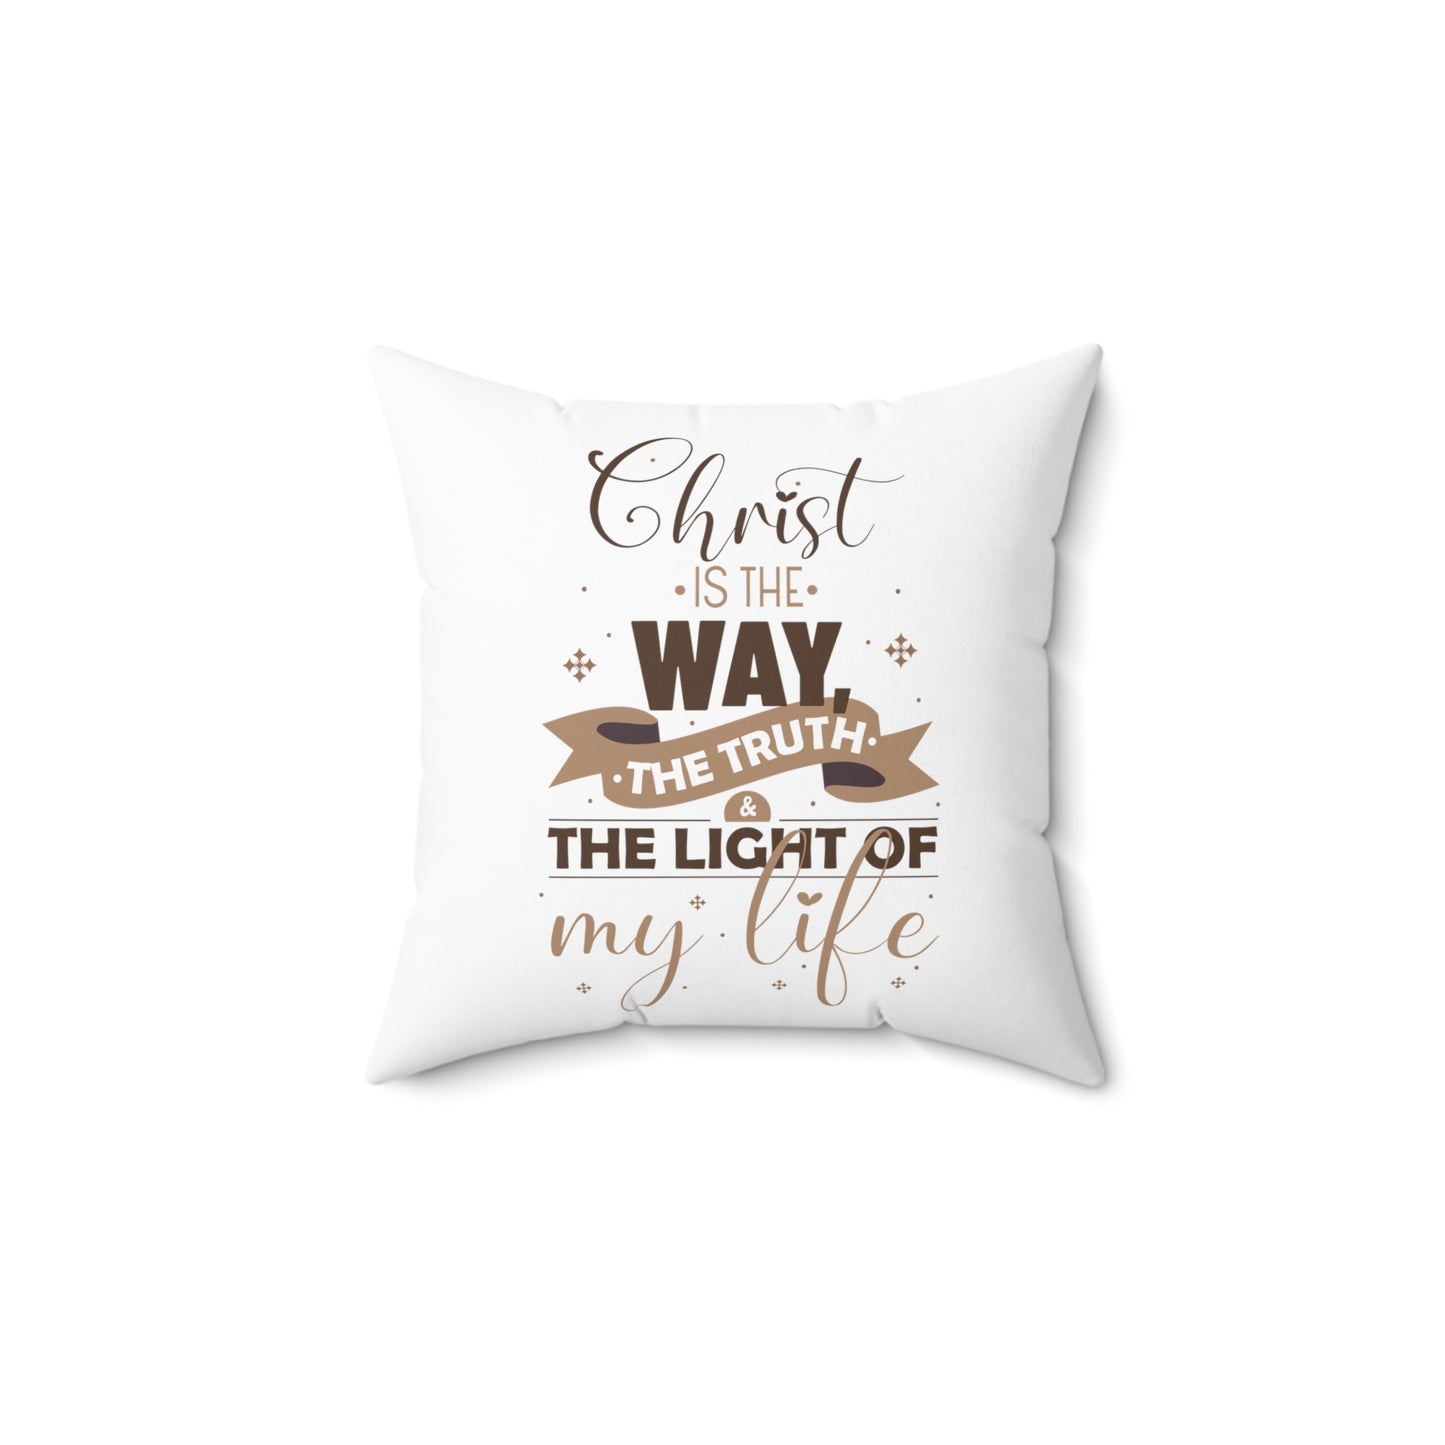 Christ Is The Way, The Truth, & The Light Of My Life Pillow